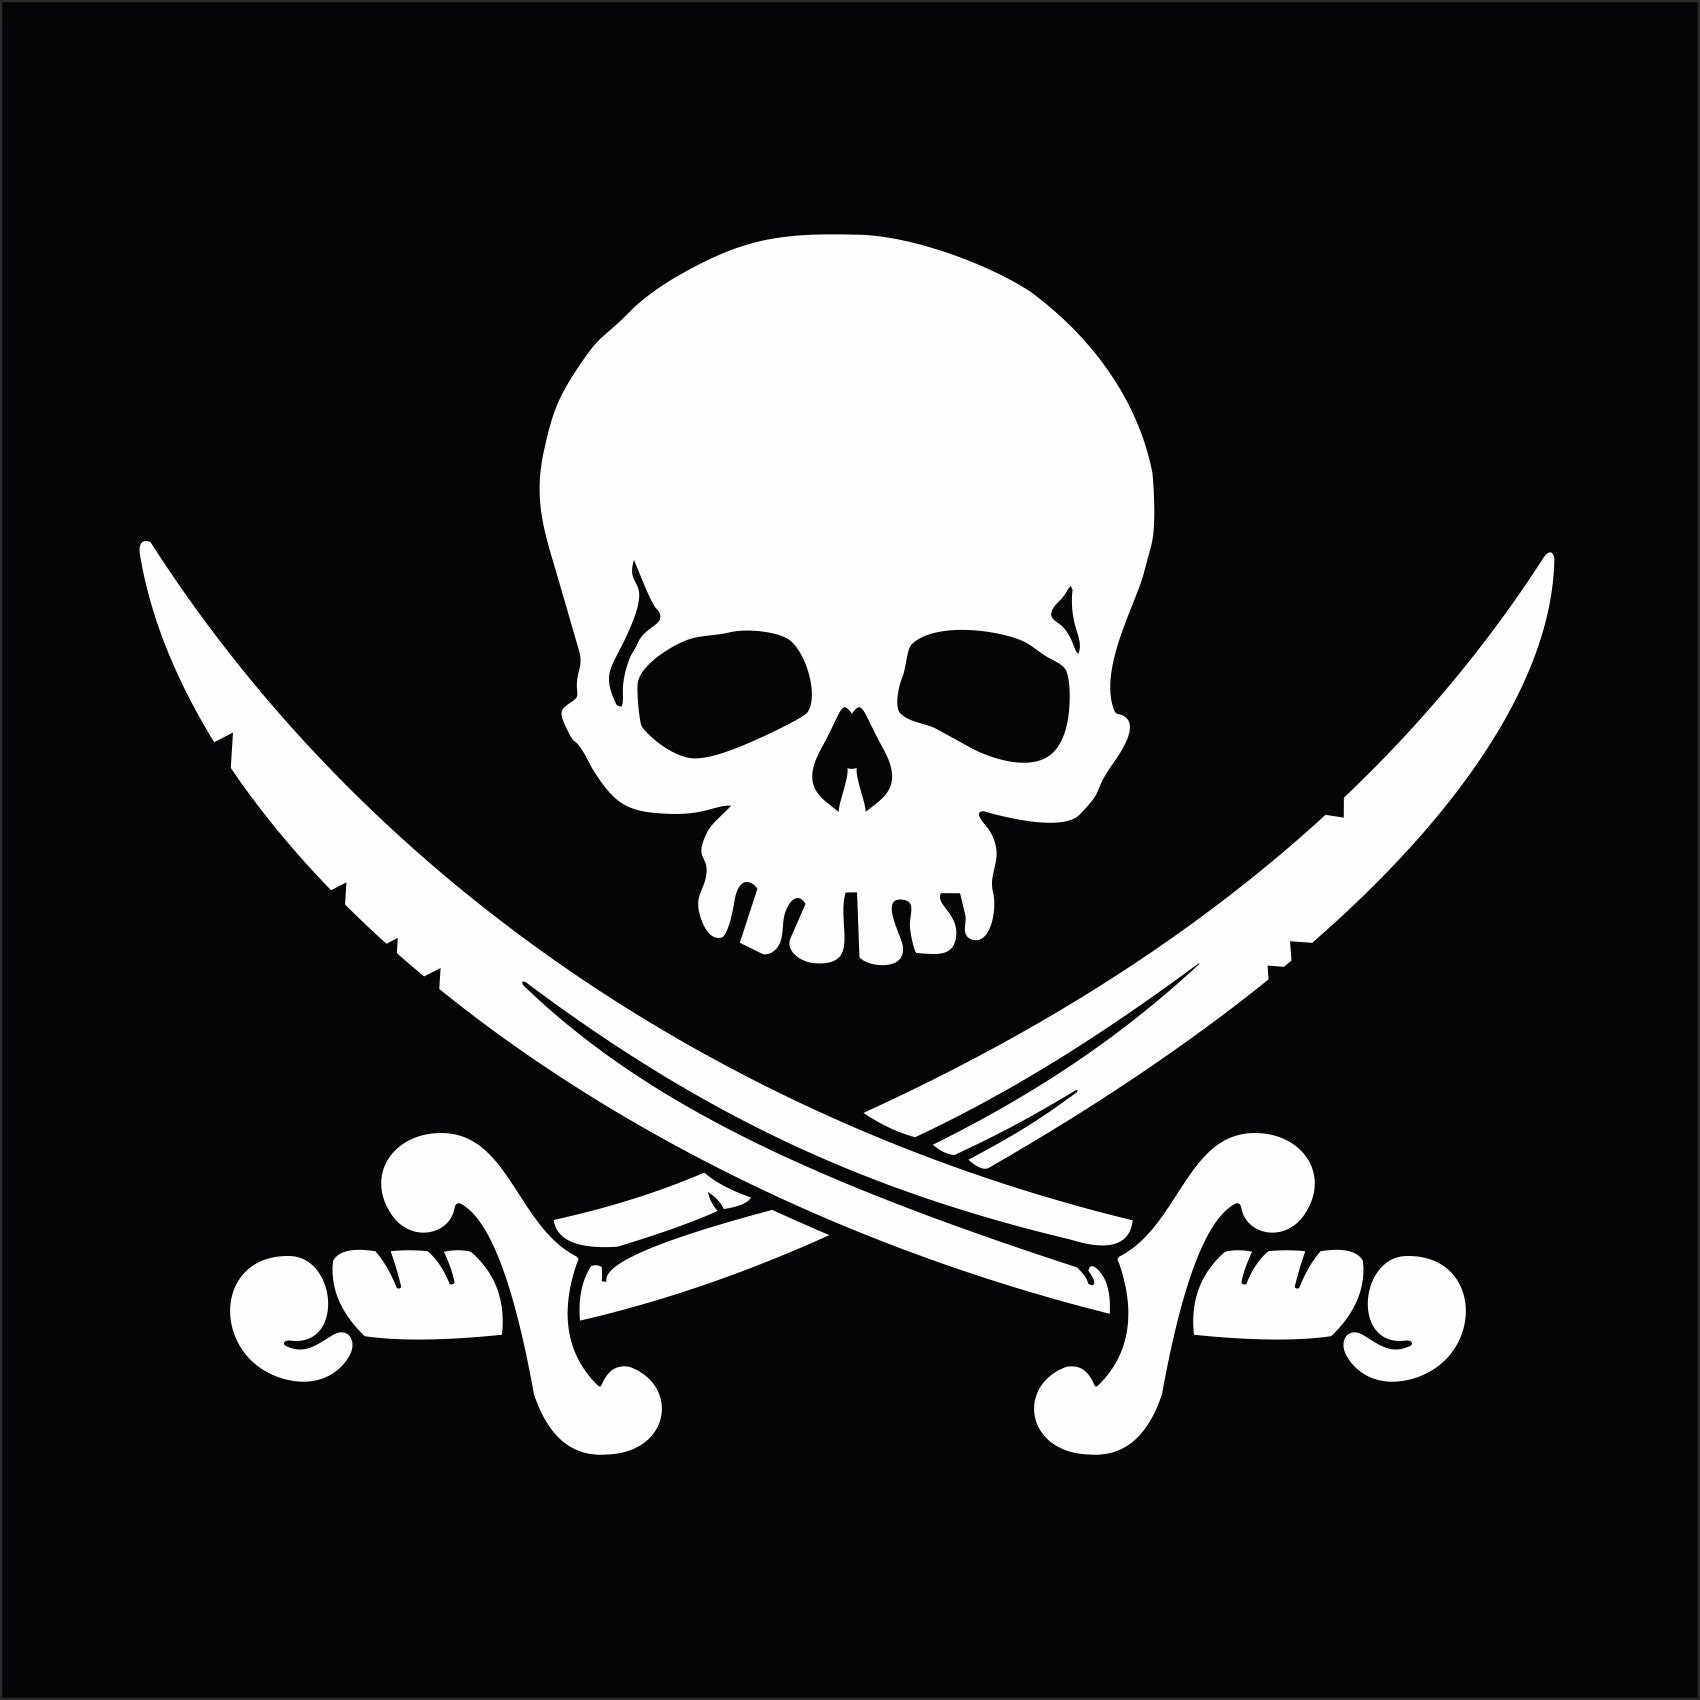 20 X 15.3 Inches Stickers Decal Cross Swords Skull Pirate Tablet Laptop Weatherproof Sp